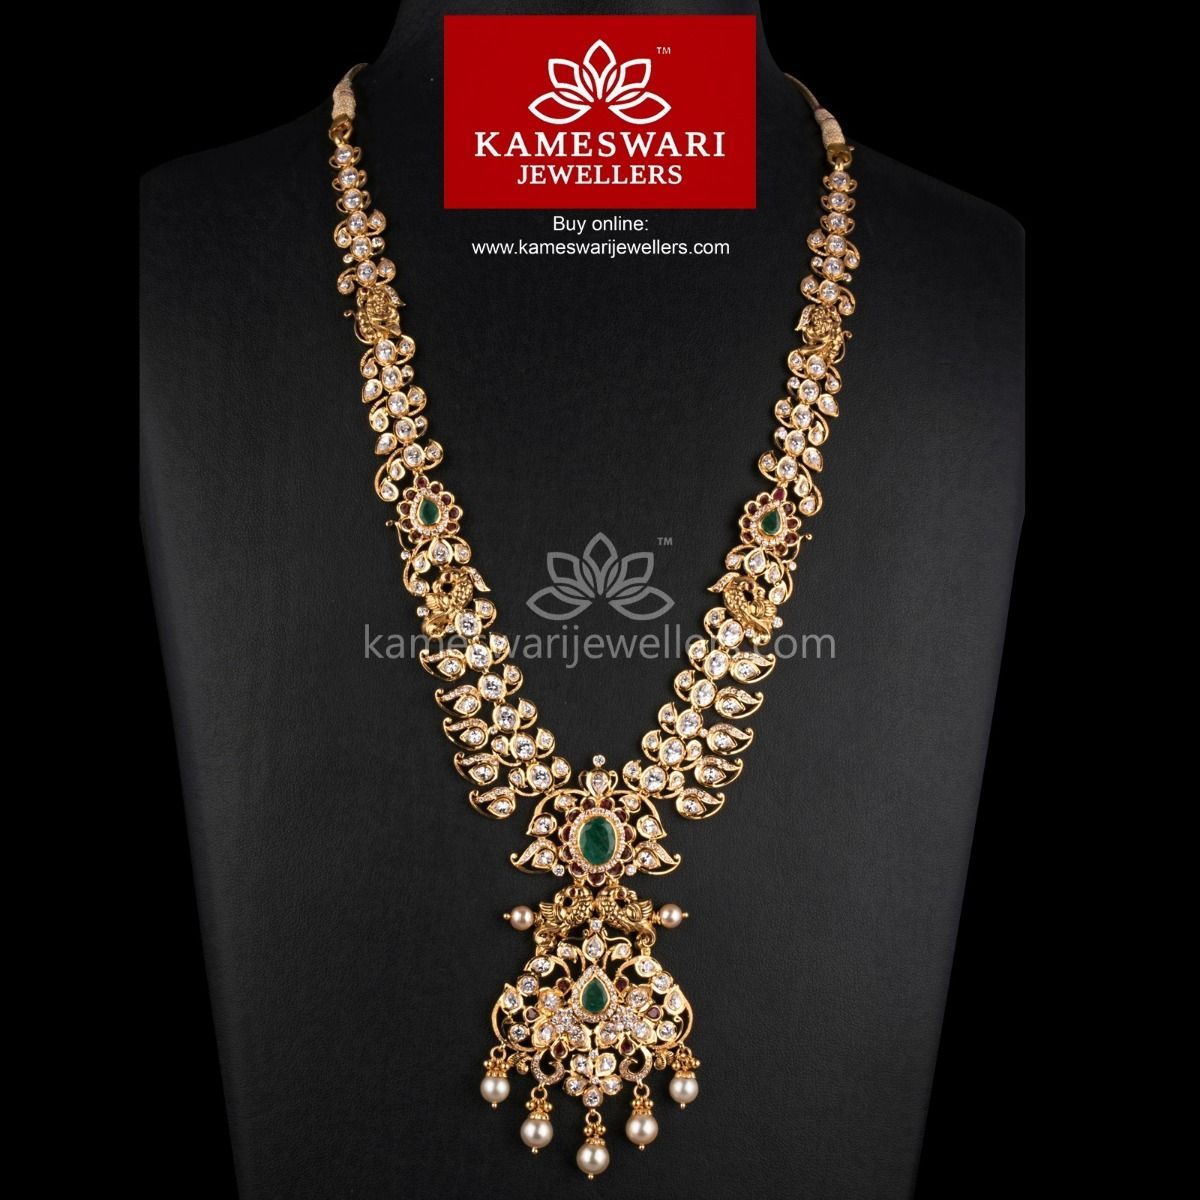 Pachiwork Tradition Jewelry Design Necklace Gold Bridal